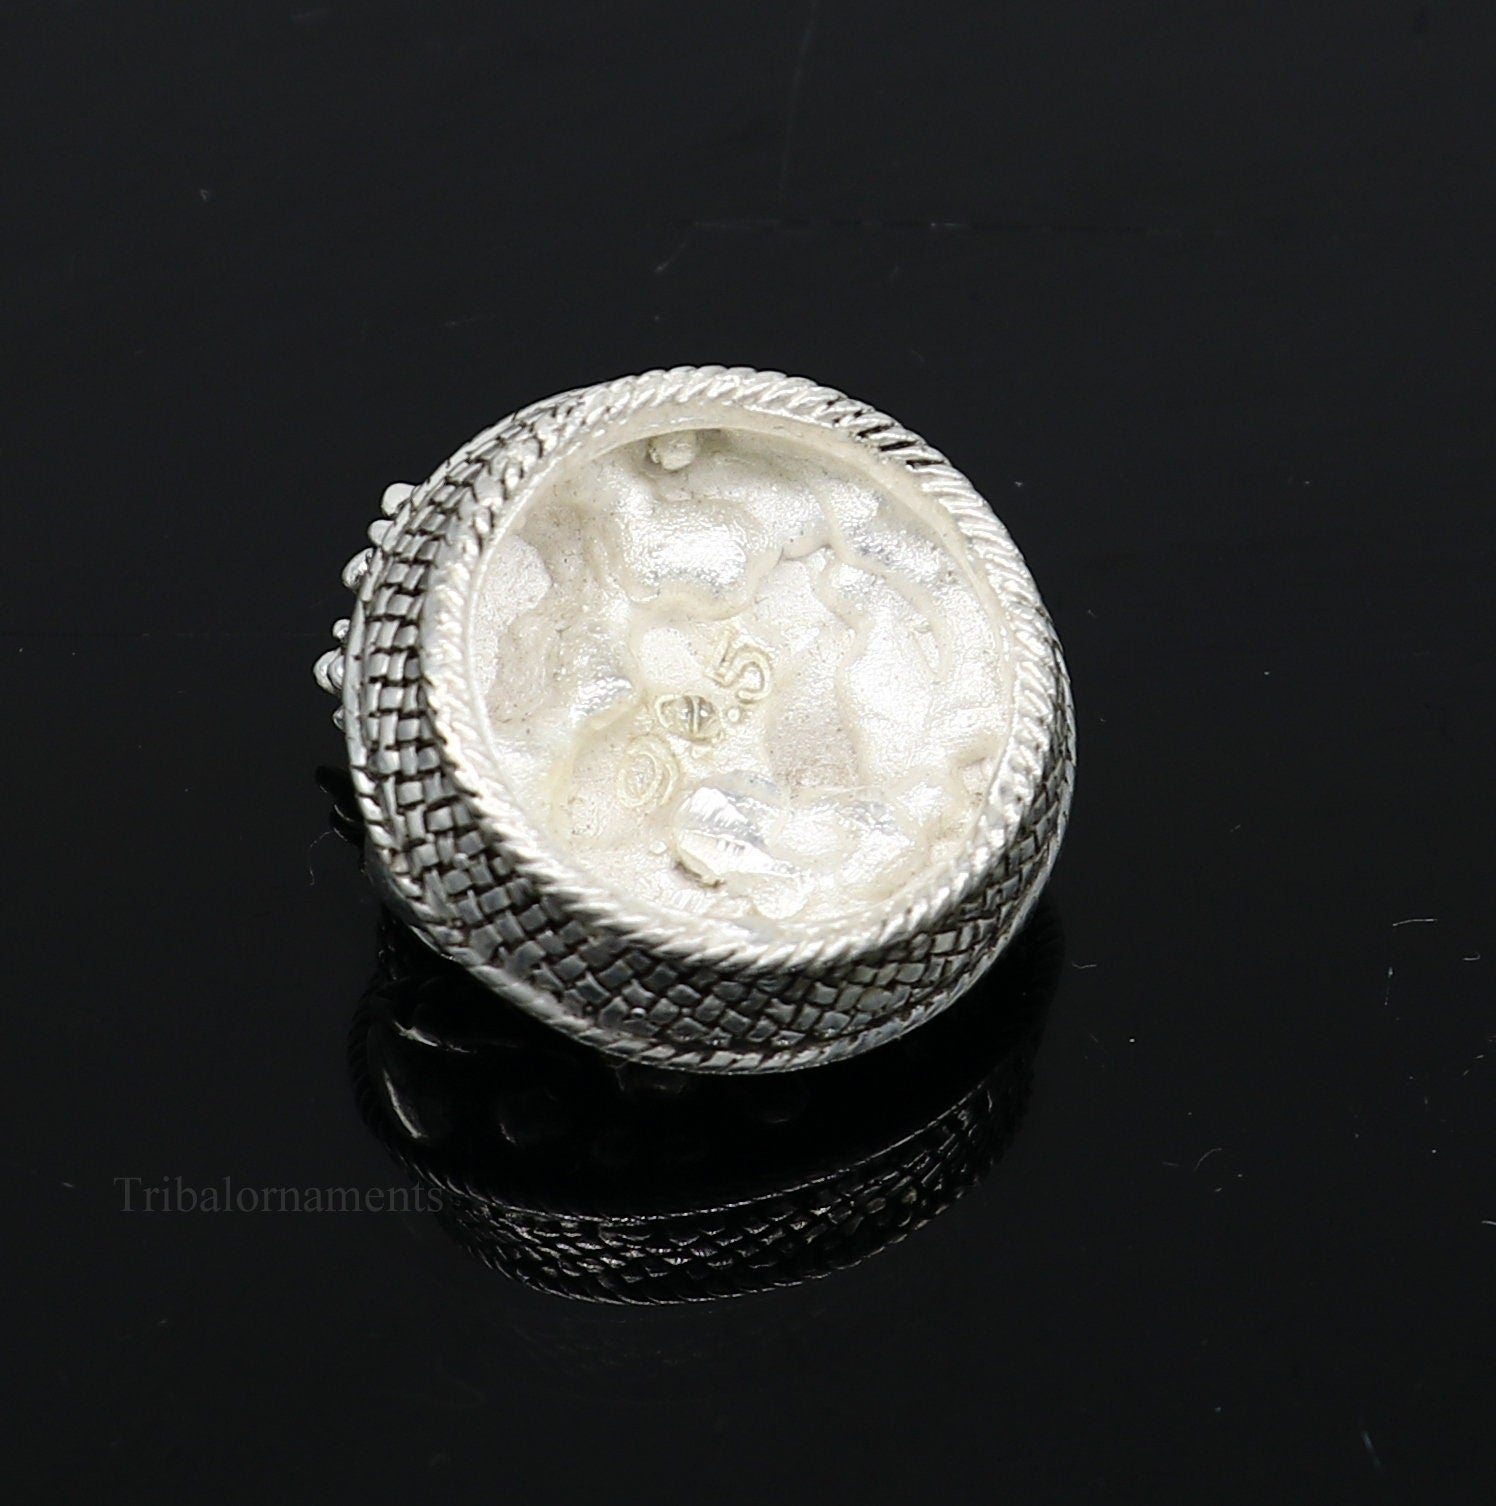 Buy Cameo Ring, Roman Ring, Solid Silver Ring, Sterling Silver Ring,  Renaissance Ring, Roman Jewelry, Matching Set, Shell Ring, Lady Ring,  Online in India - Etsy